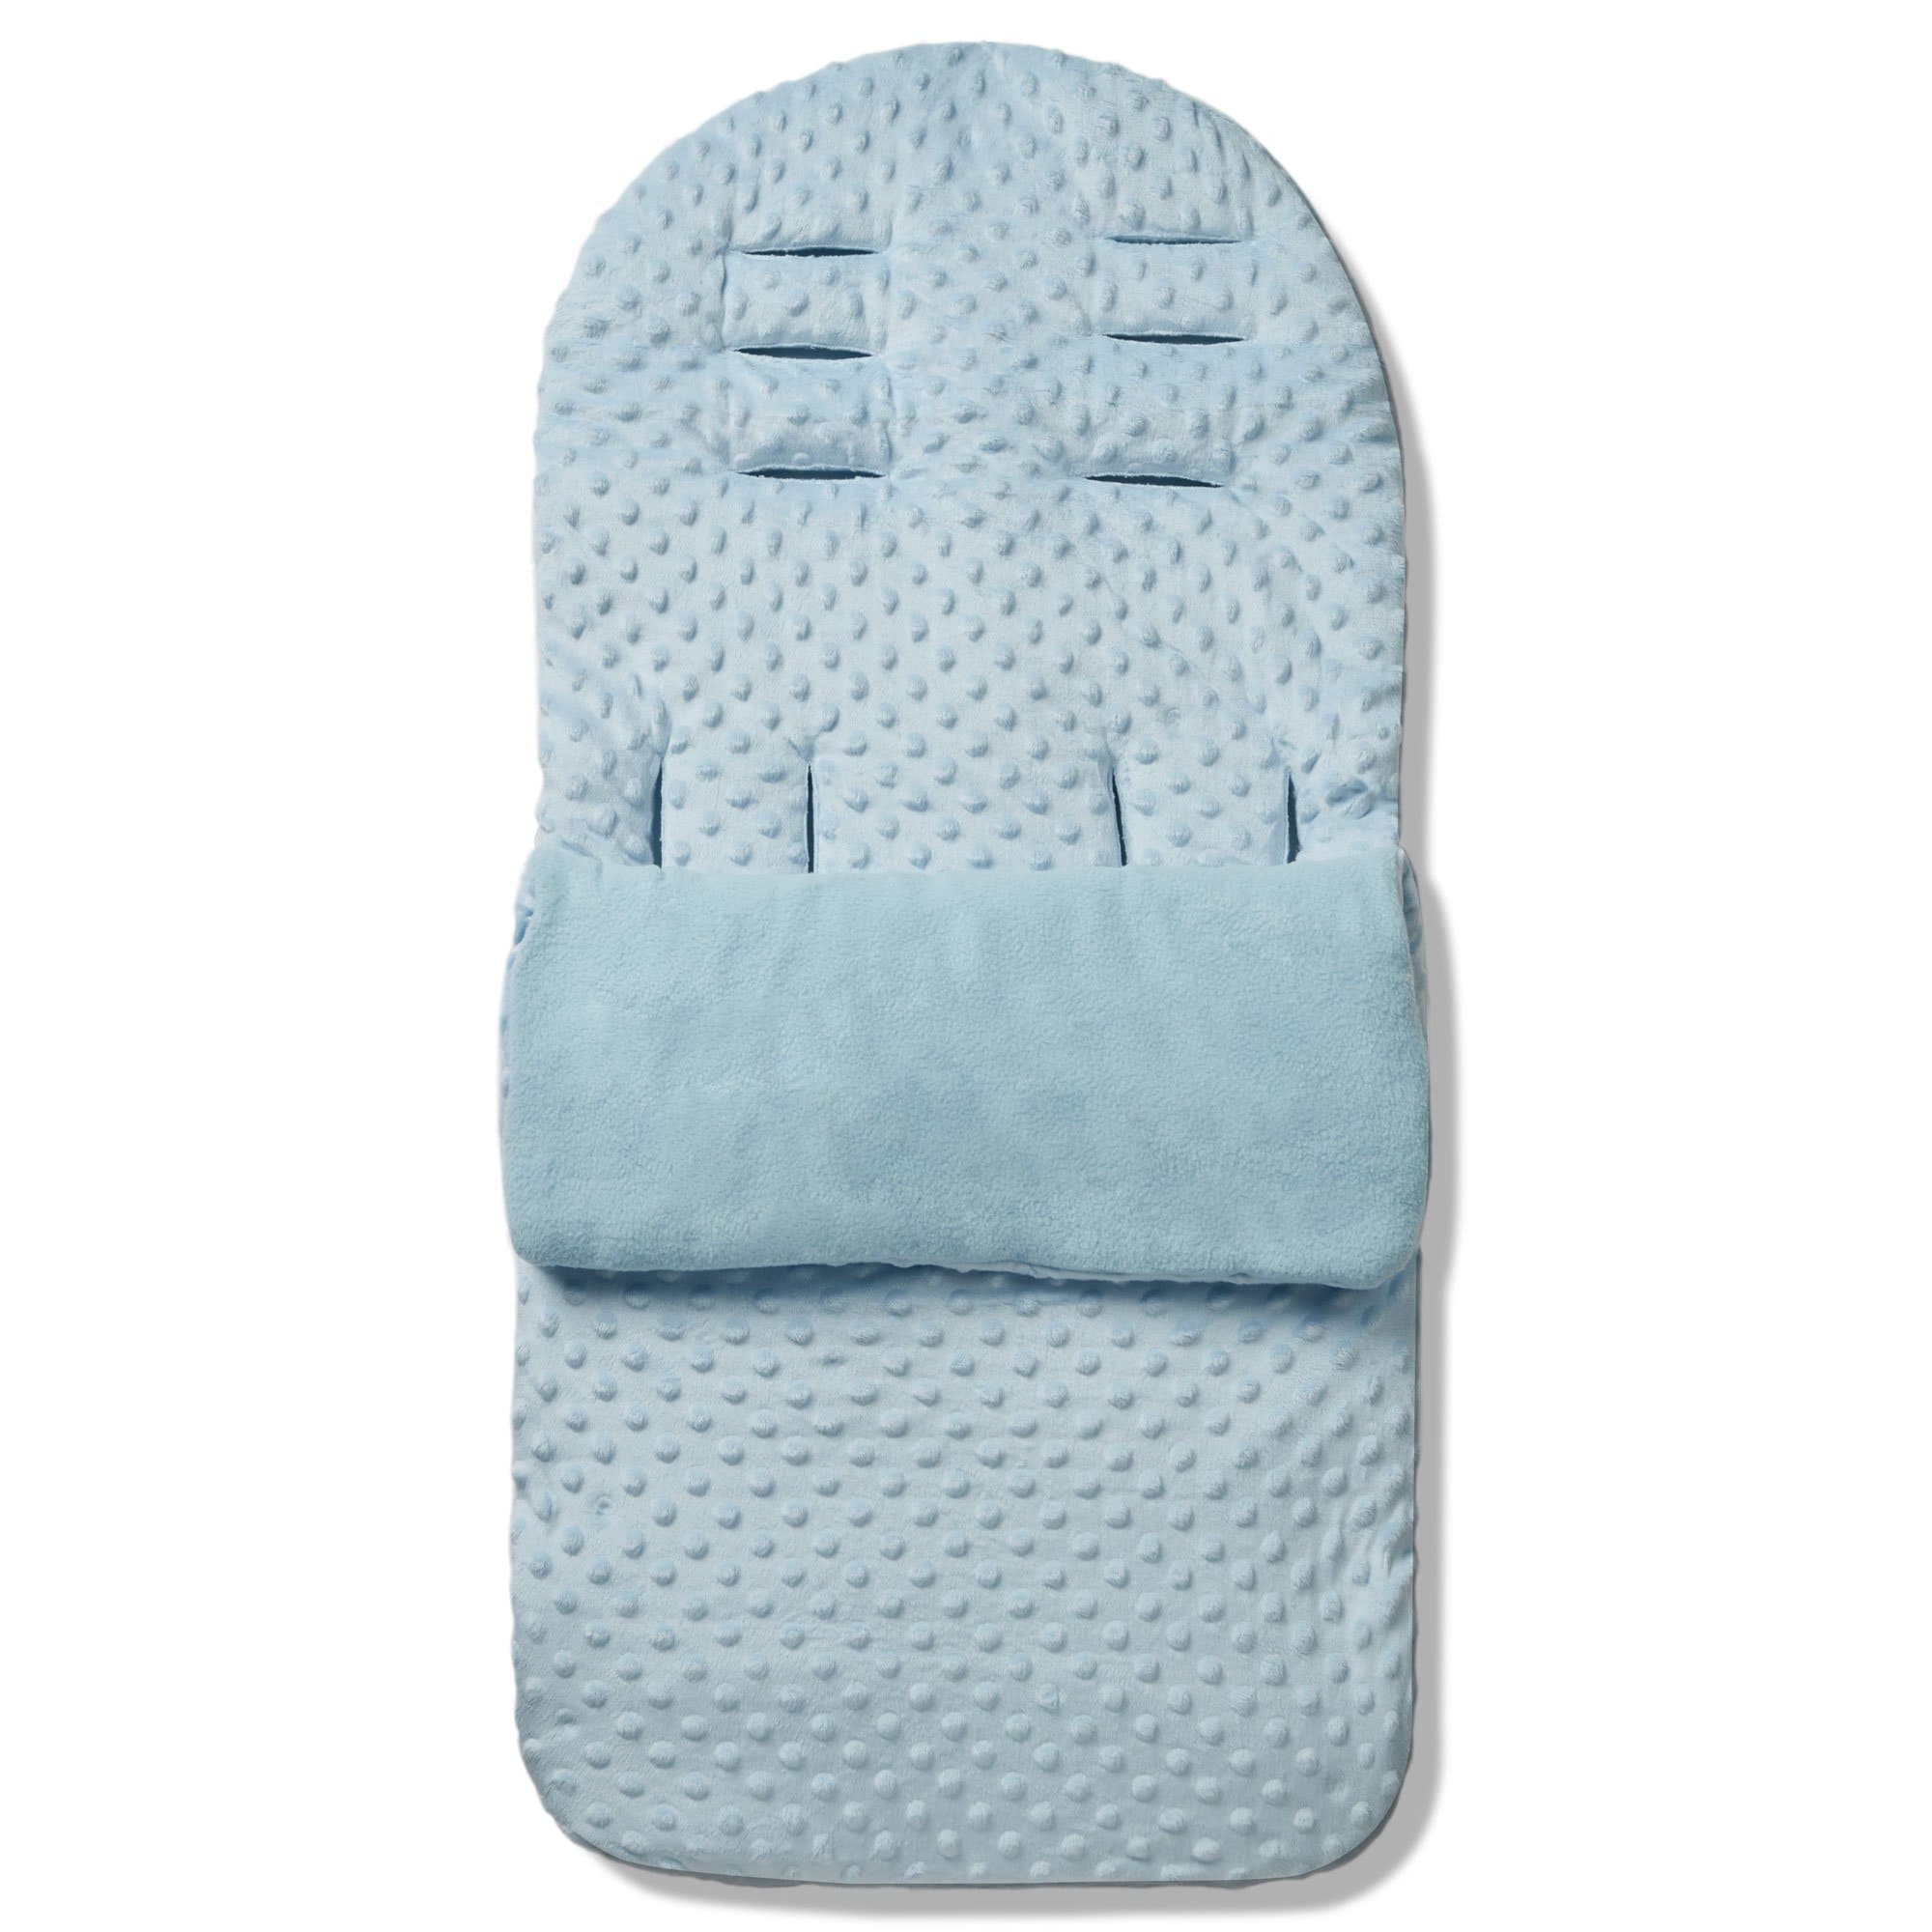 Dimple Footmuff / Cosy Toes Compatible with Emmaljunga - For Your Little One